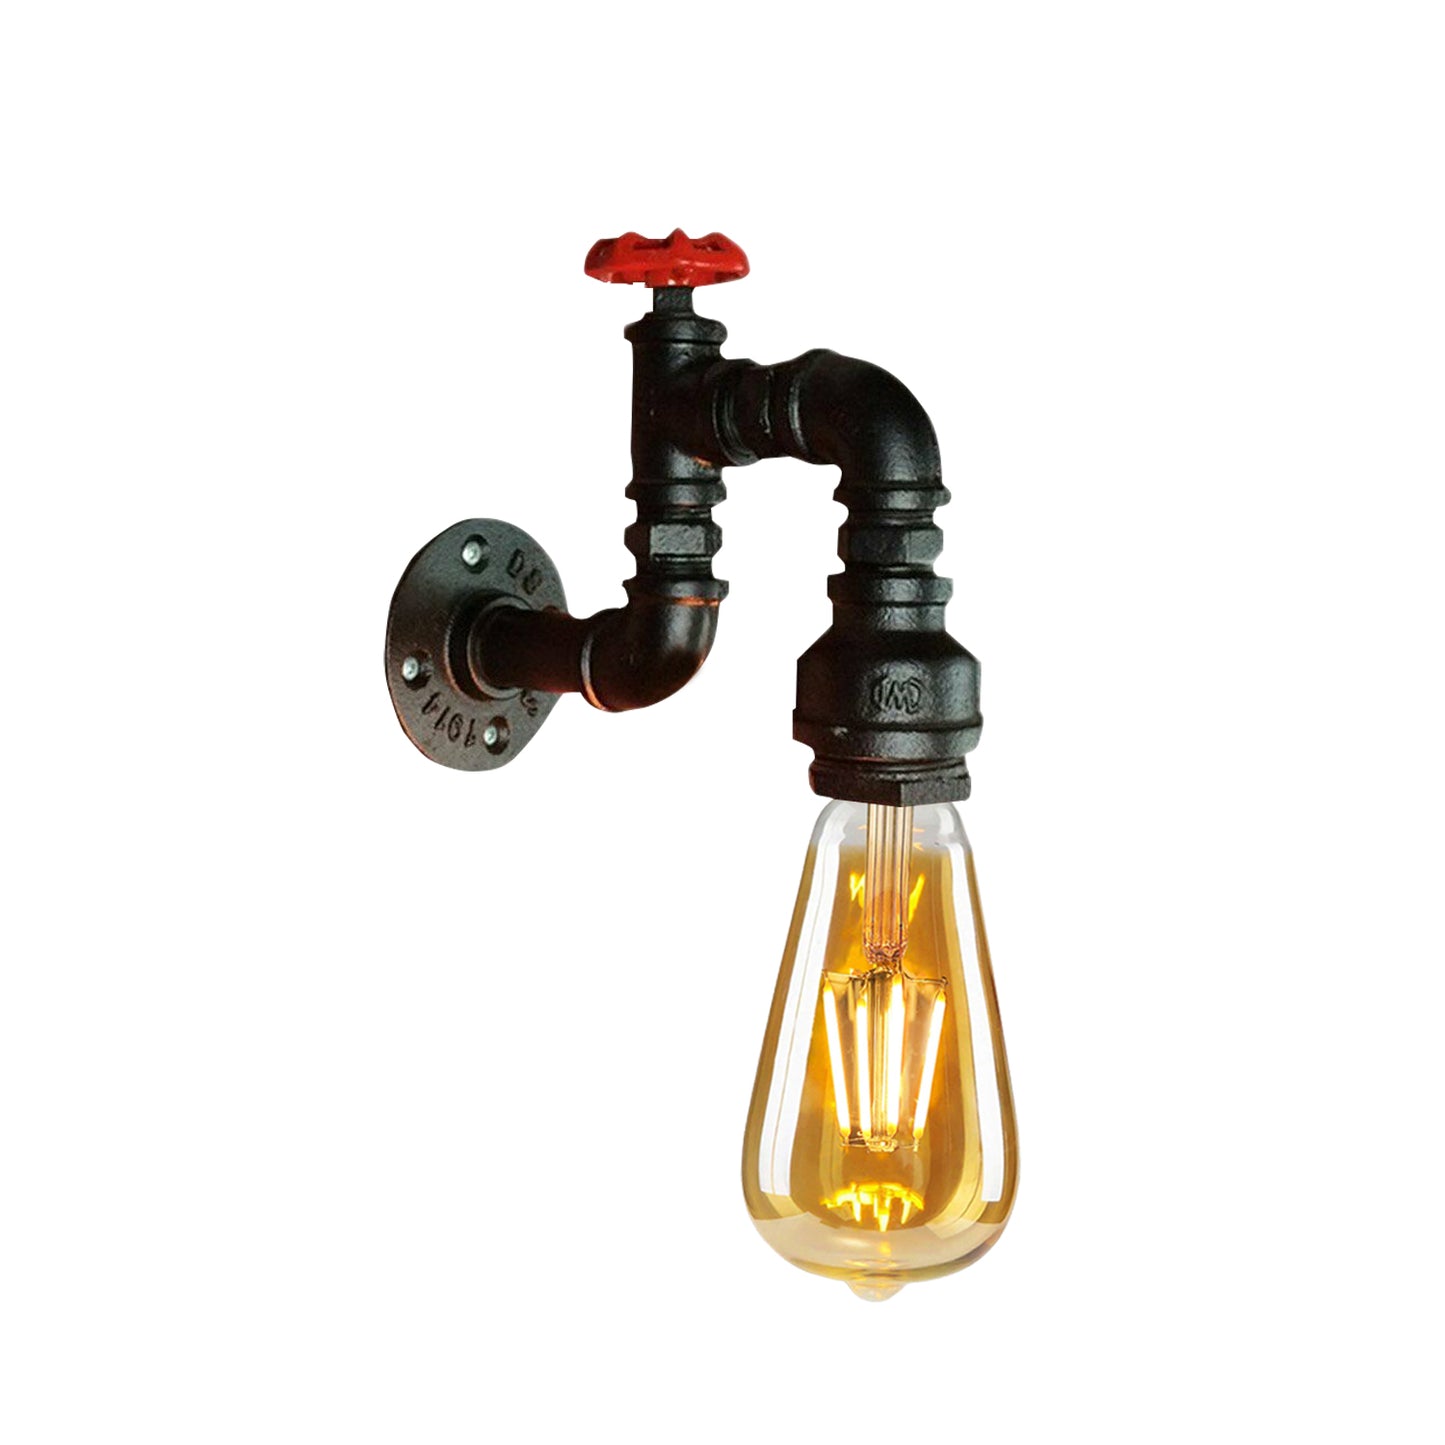 Vintage Industrial Rustic Water Pipe Wall Light Fitting Industrial Sconce  For Living Kitchen Restaurant